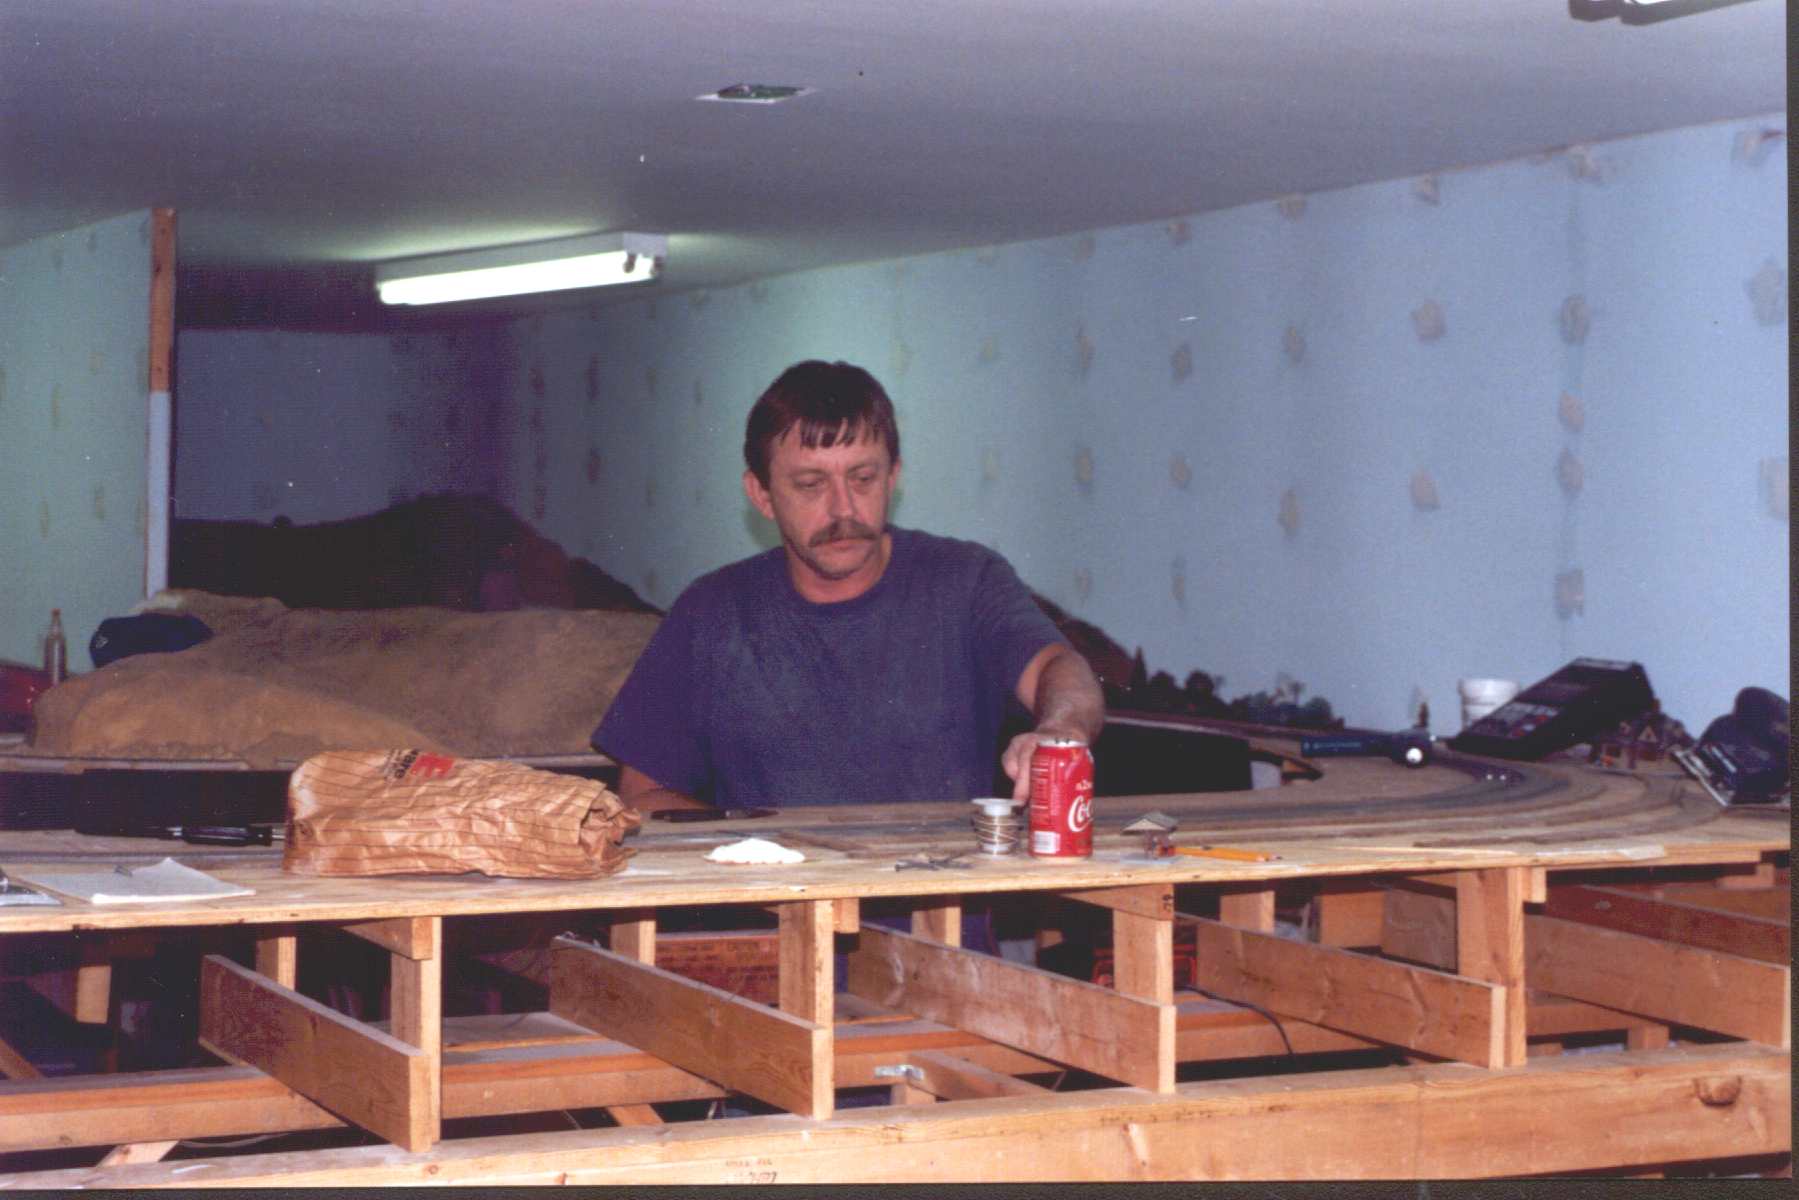 Lou preparing to remove a section of the old layout